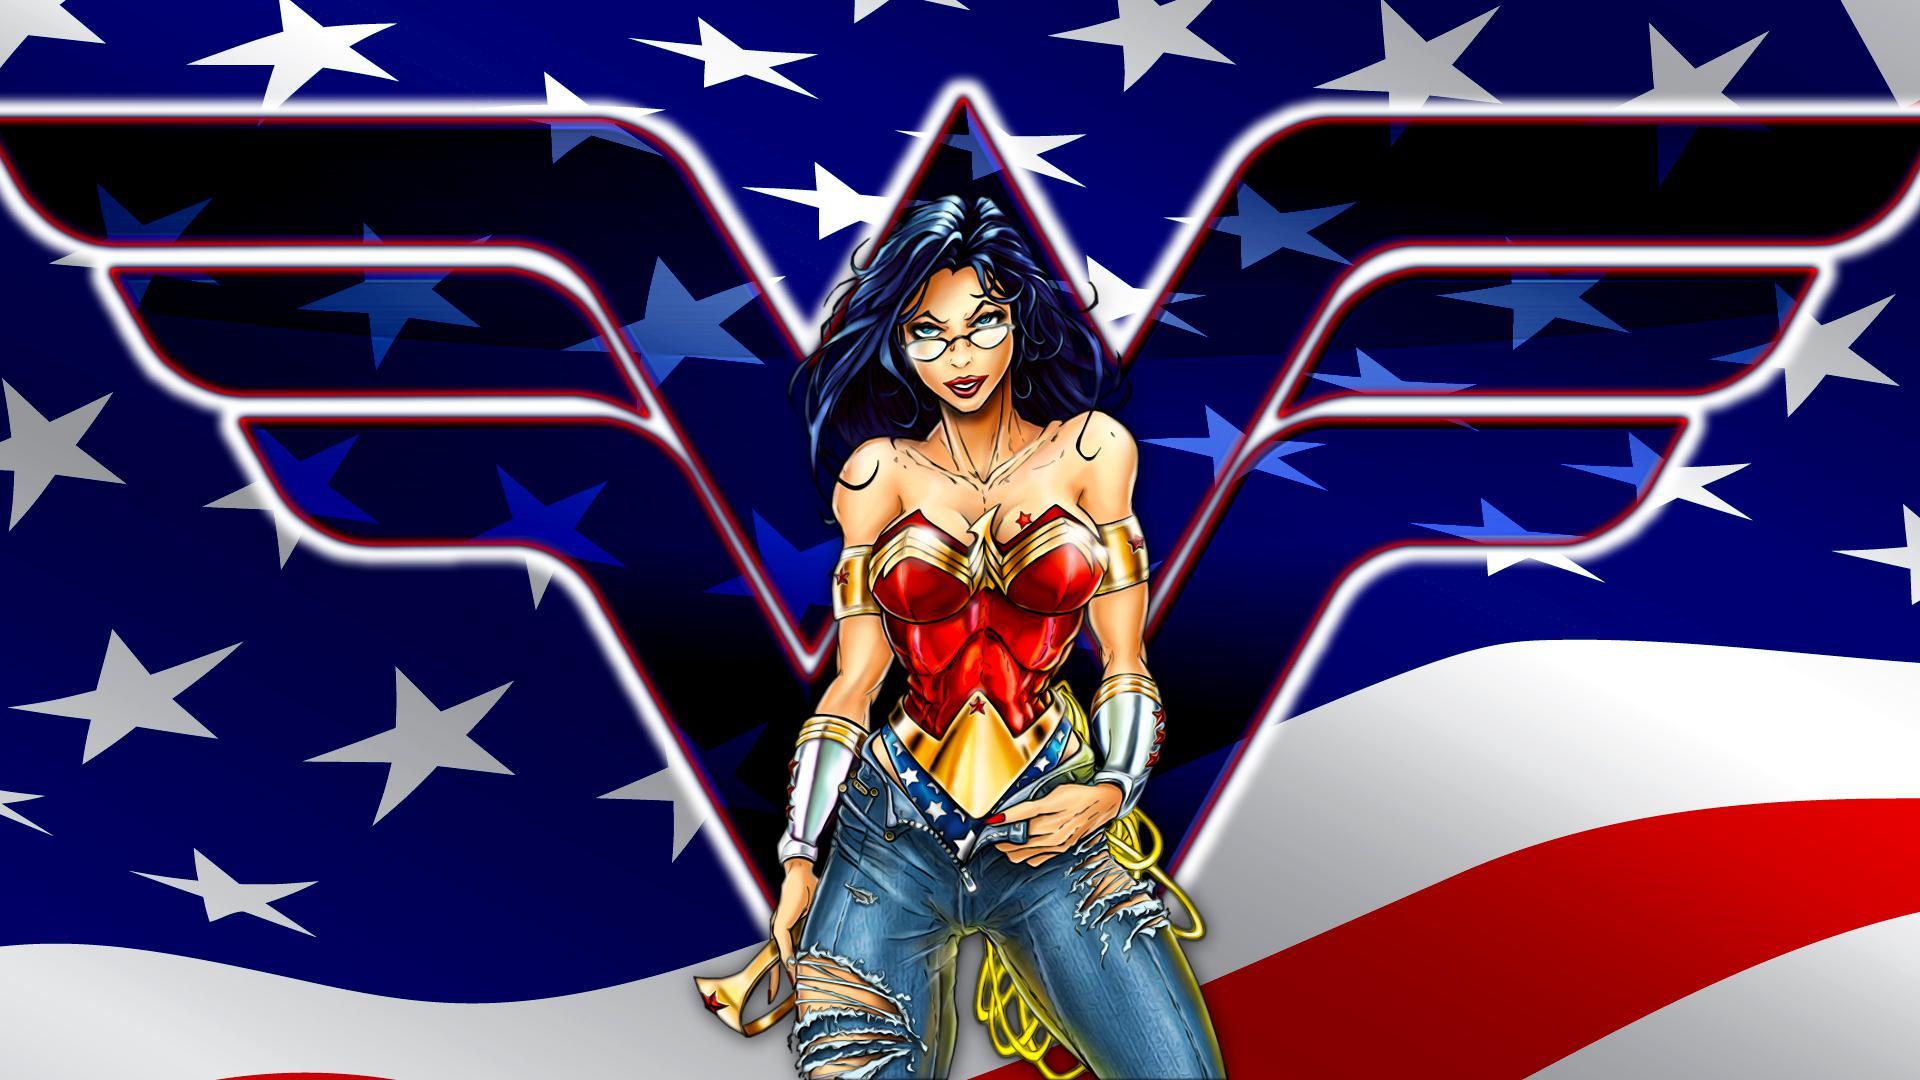 Wonder Woman High Quality And Resolution Wallpaper On